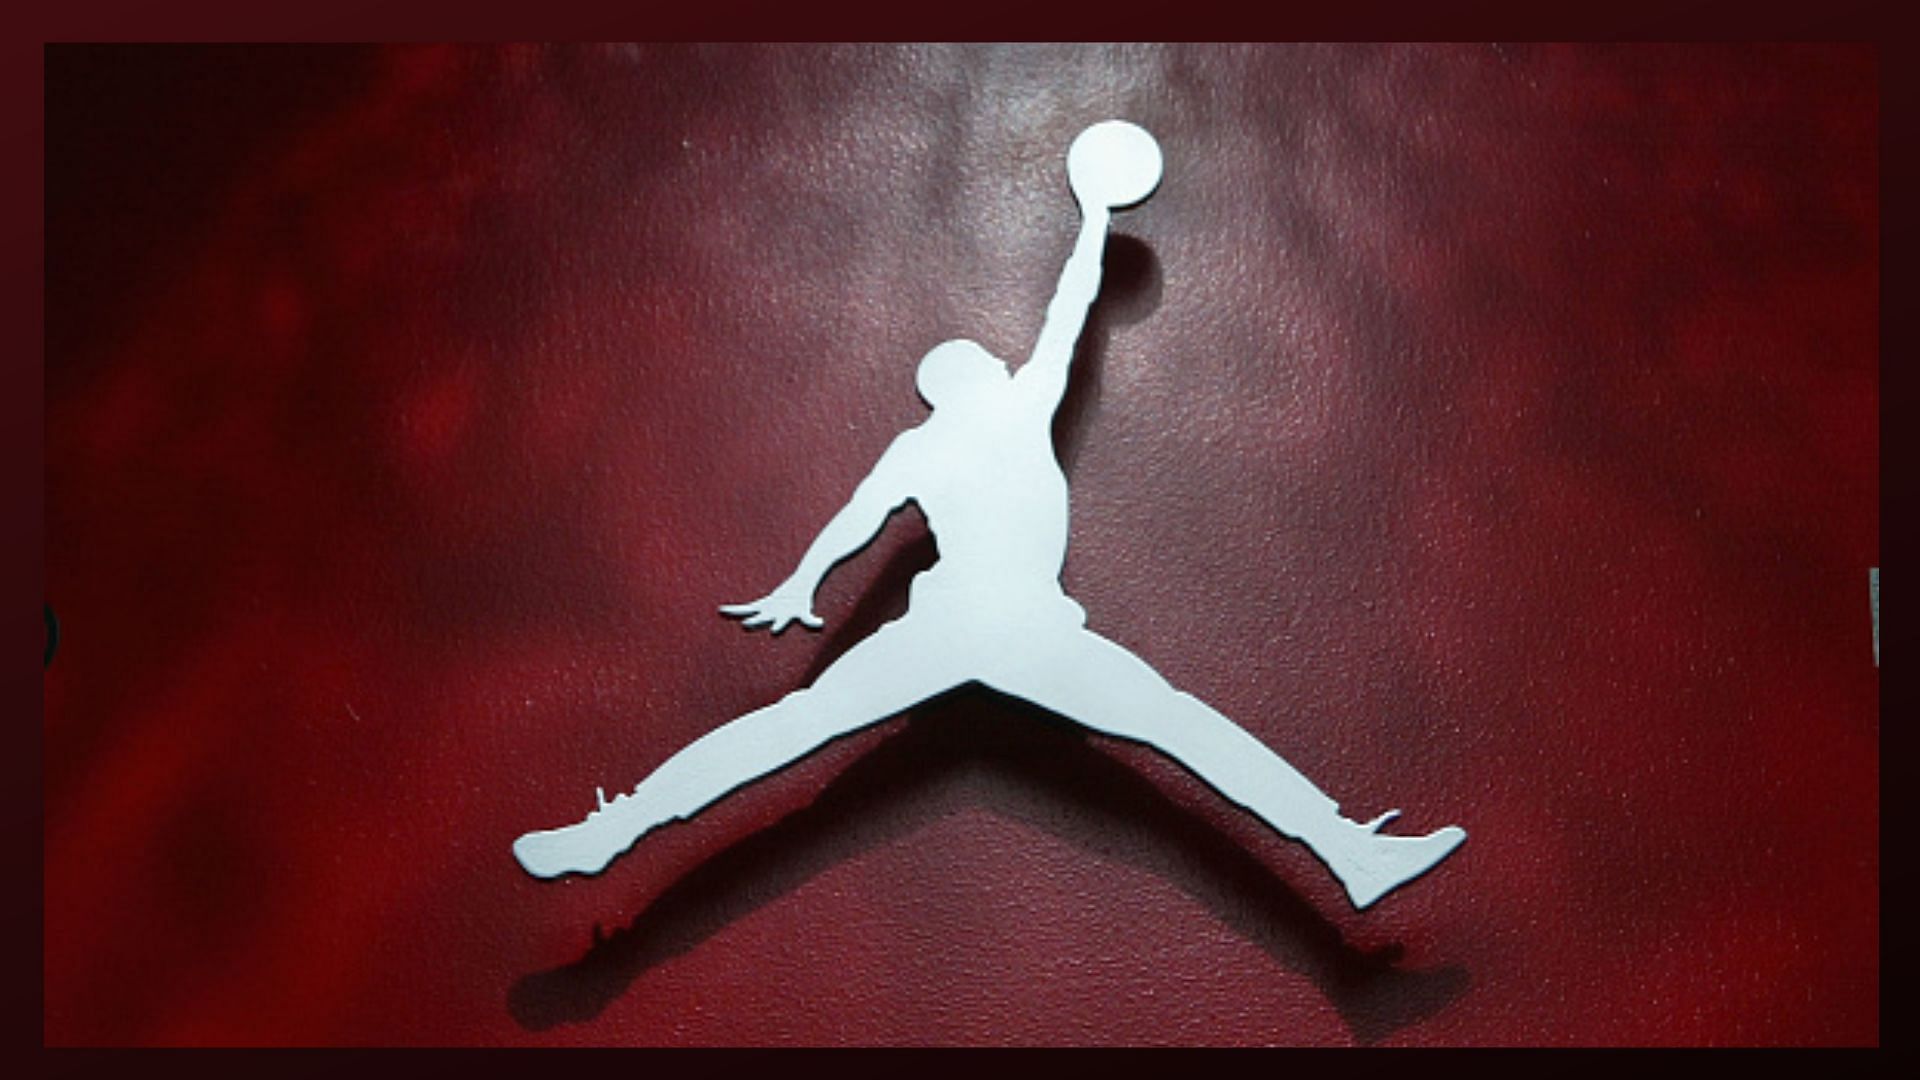 The Jumpman logos are placed on the tongues and heels (Image via Twitter/@outkick)